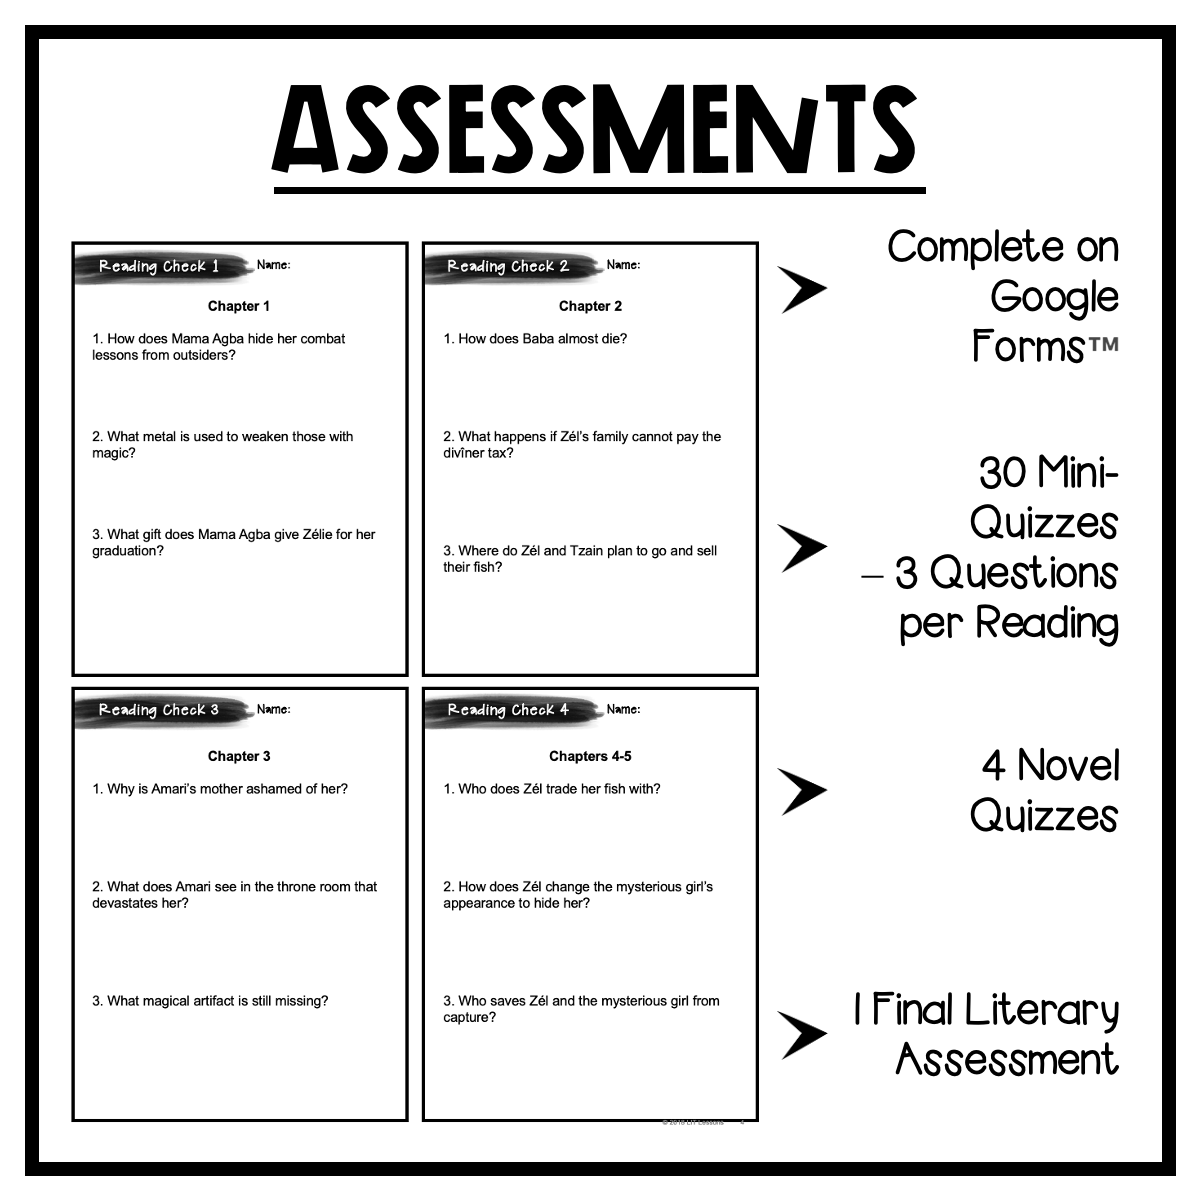 Bone　Children　and　Assessments　of　Lessons　Blood　LIT